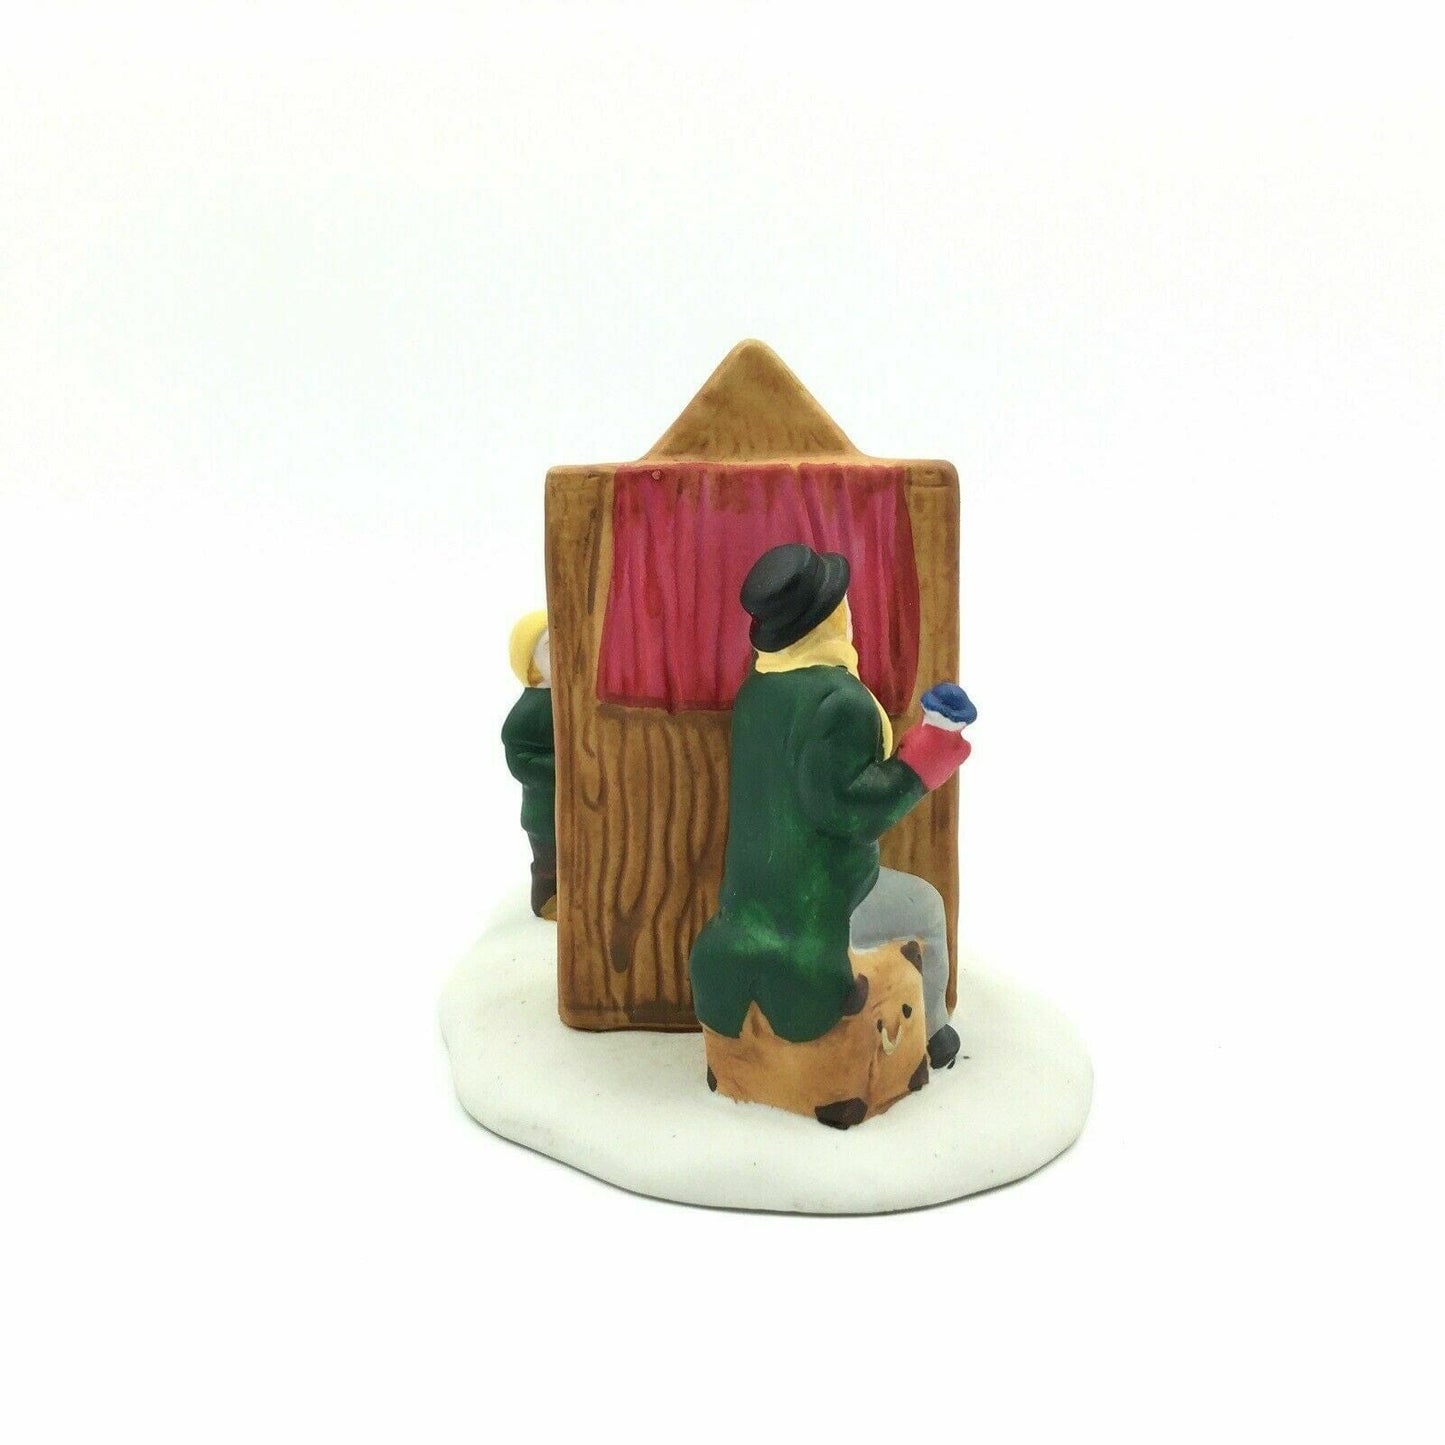 Charming Lemax Porcelain "Punch & Judy" Table Accent - Vintage-inspired - Very Good - 33" - Used - Unisex - Seasonal Village Sets & Accessories